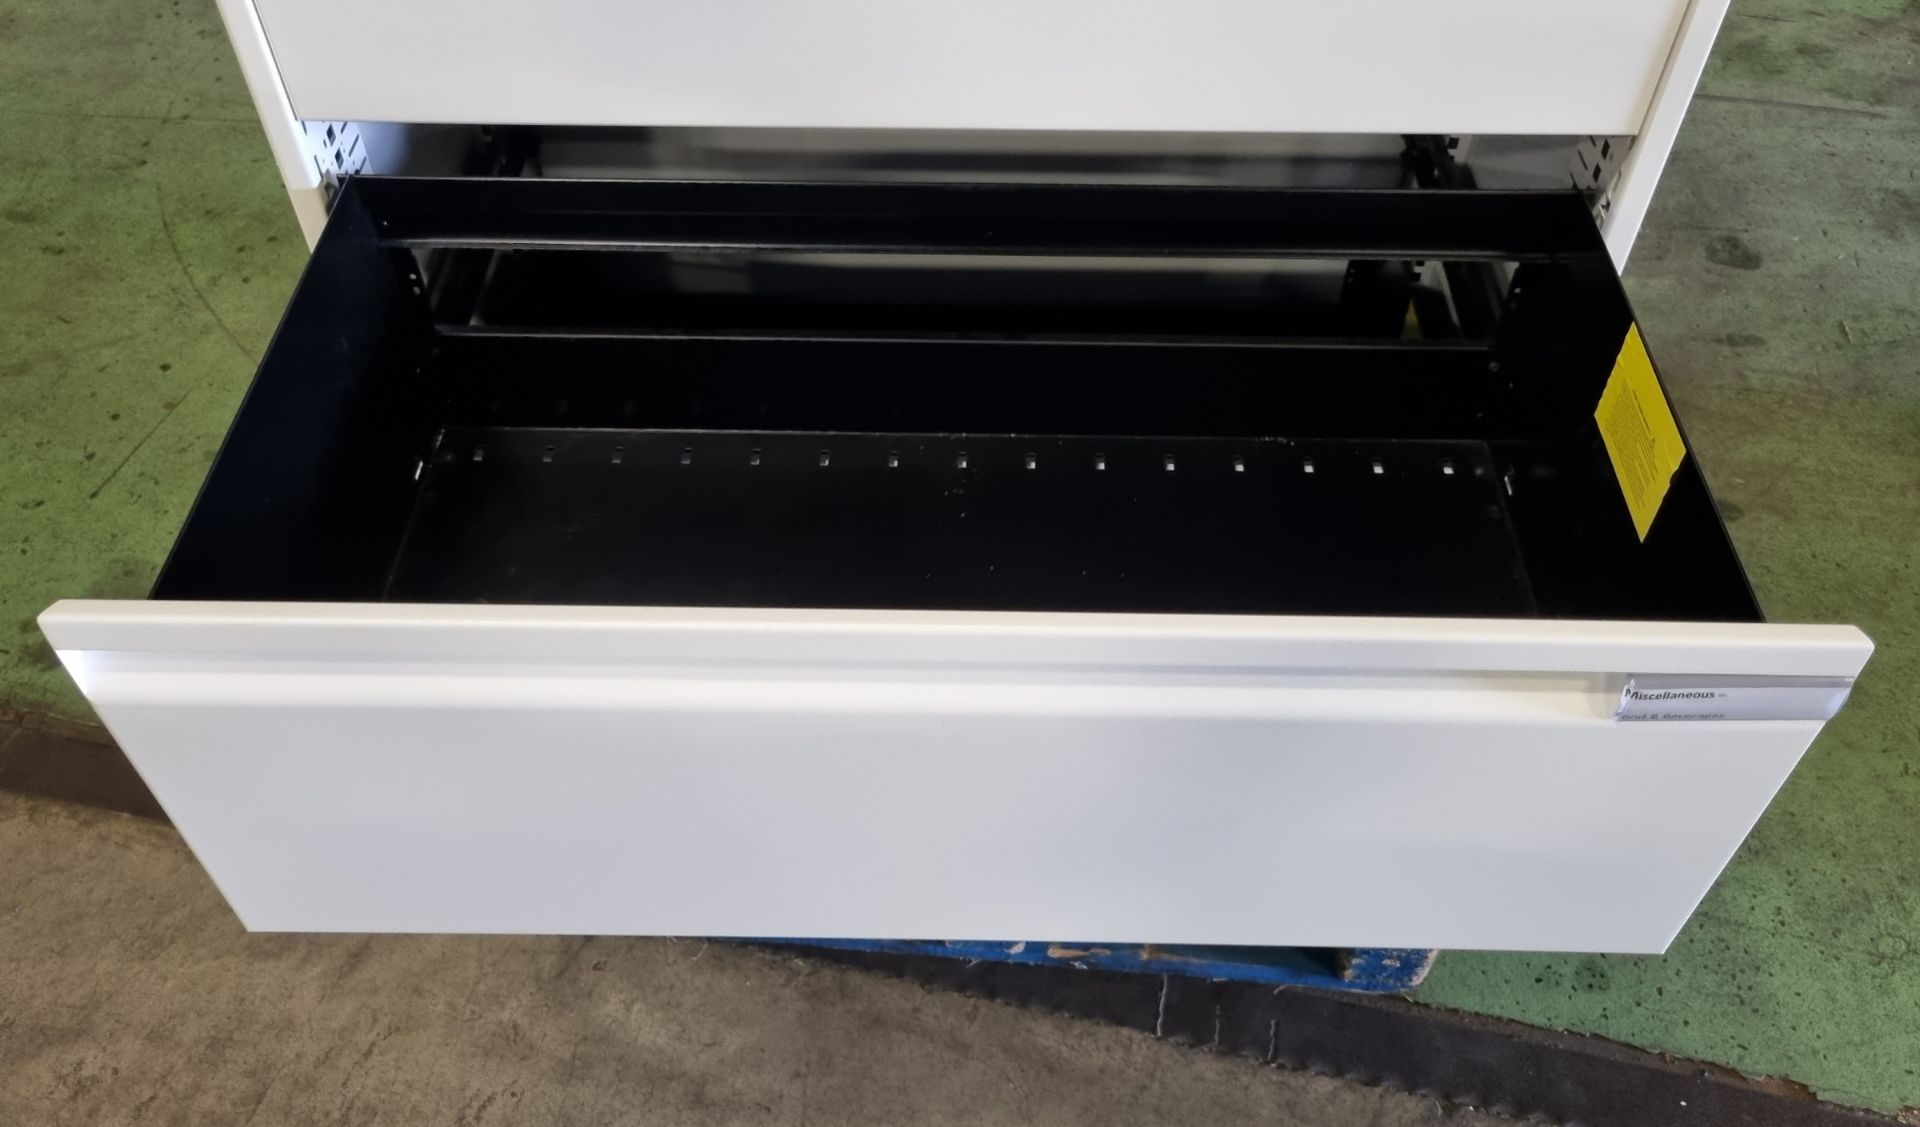 4 drawer filing cabinet - W 900 x D 480 x H 1300mm - Image 3 of 3